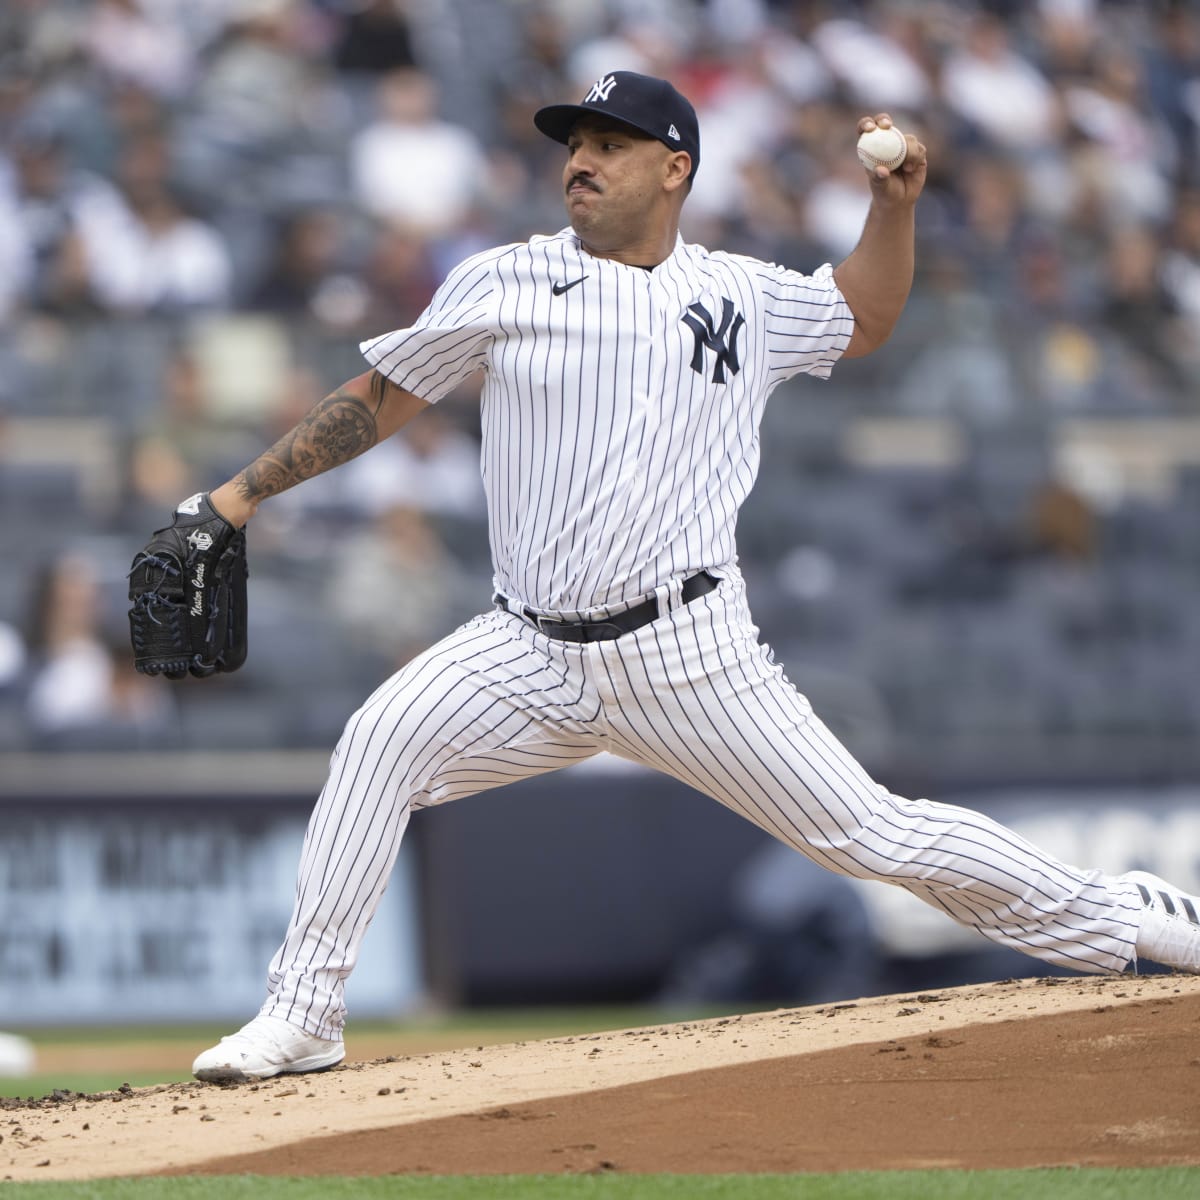 Nestor Cortes Jr. stands out in loaded Yankees pitching staff